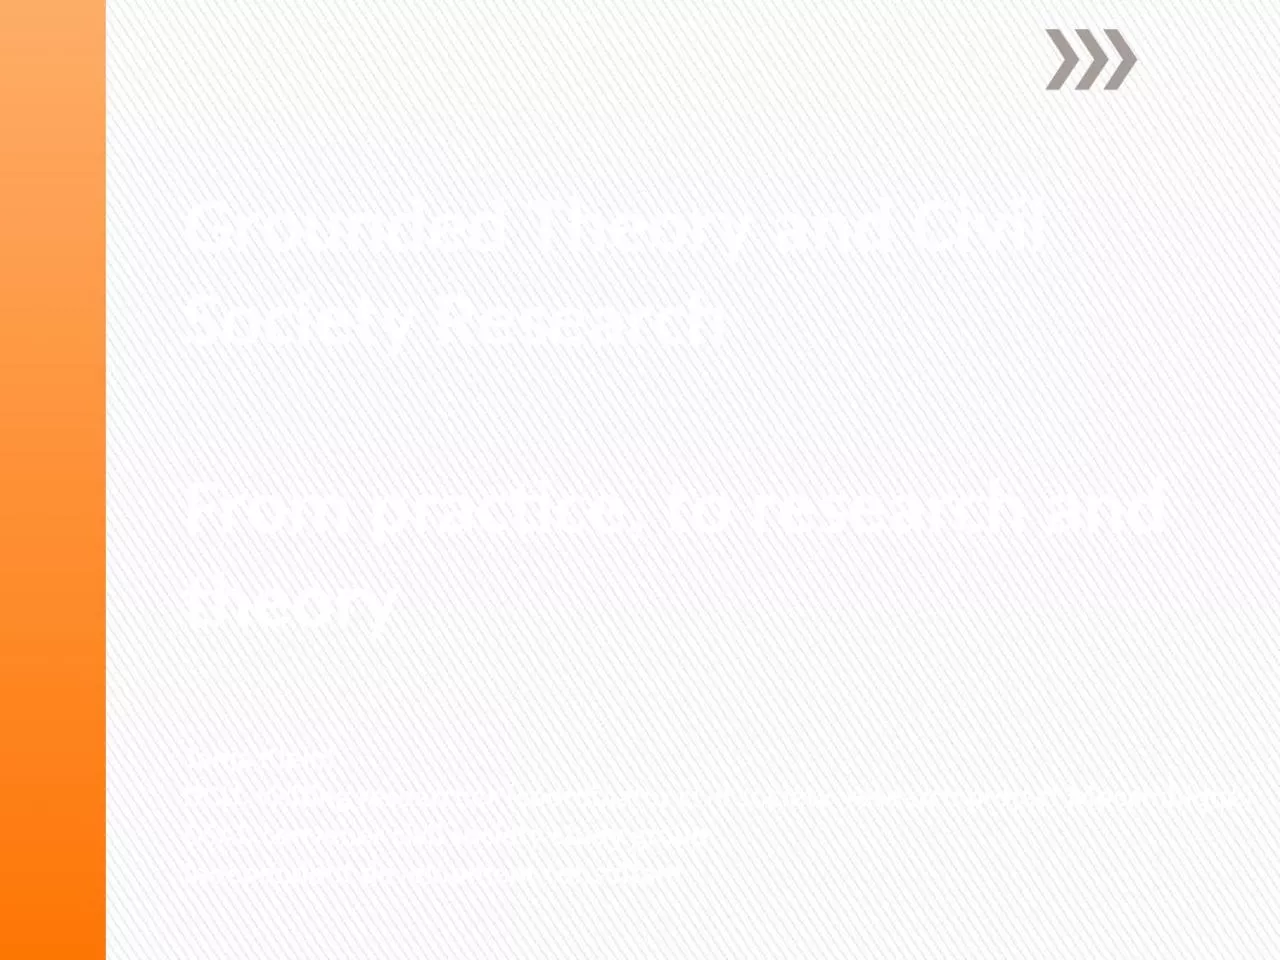 Grounded Theory and Civil  Society Research